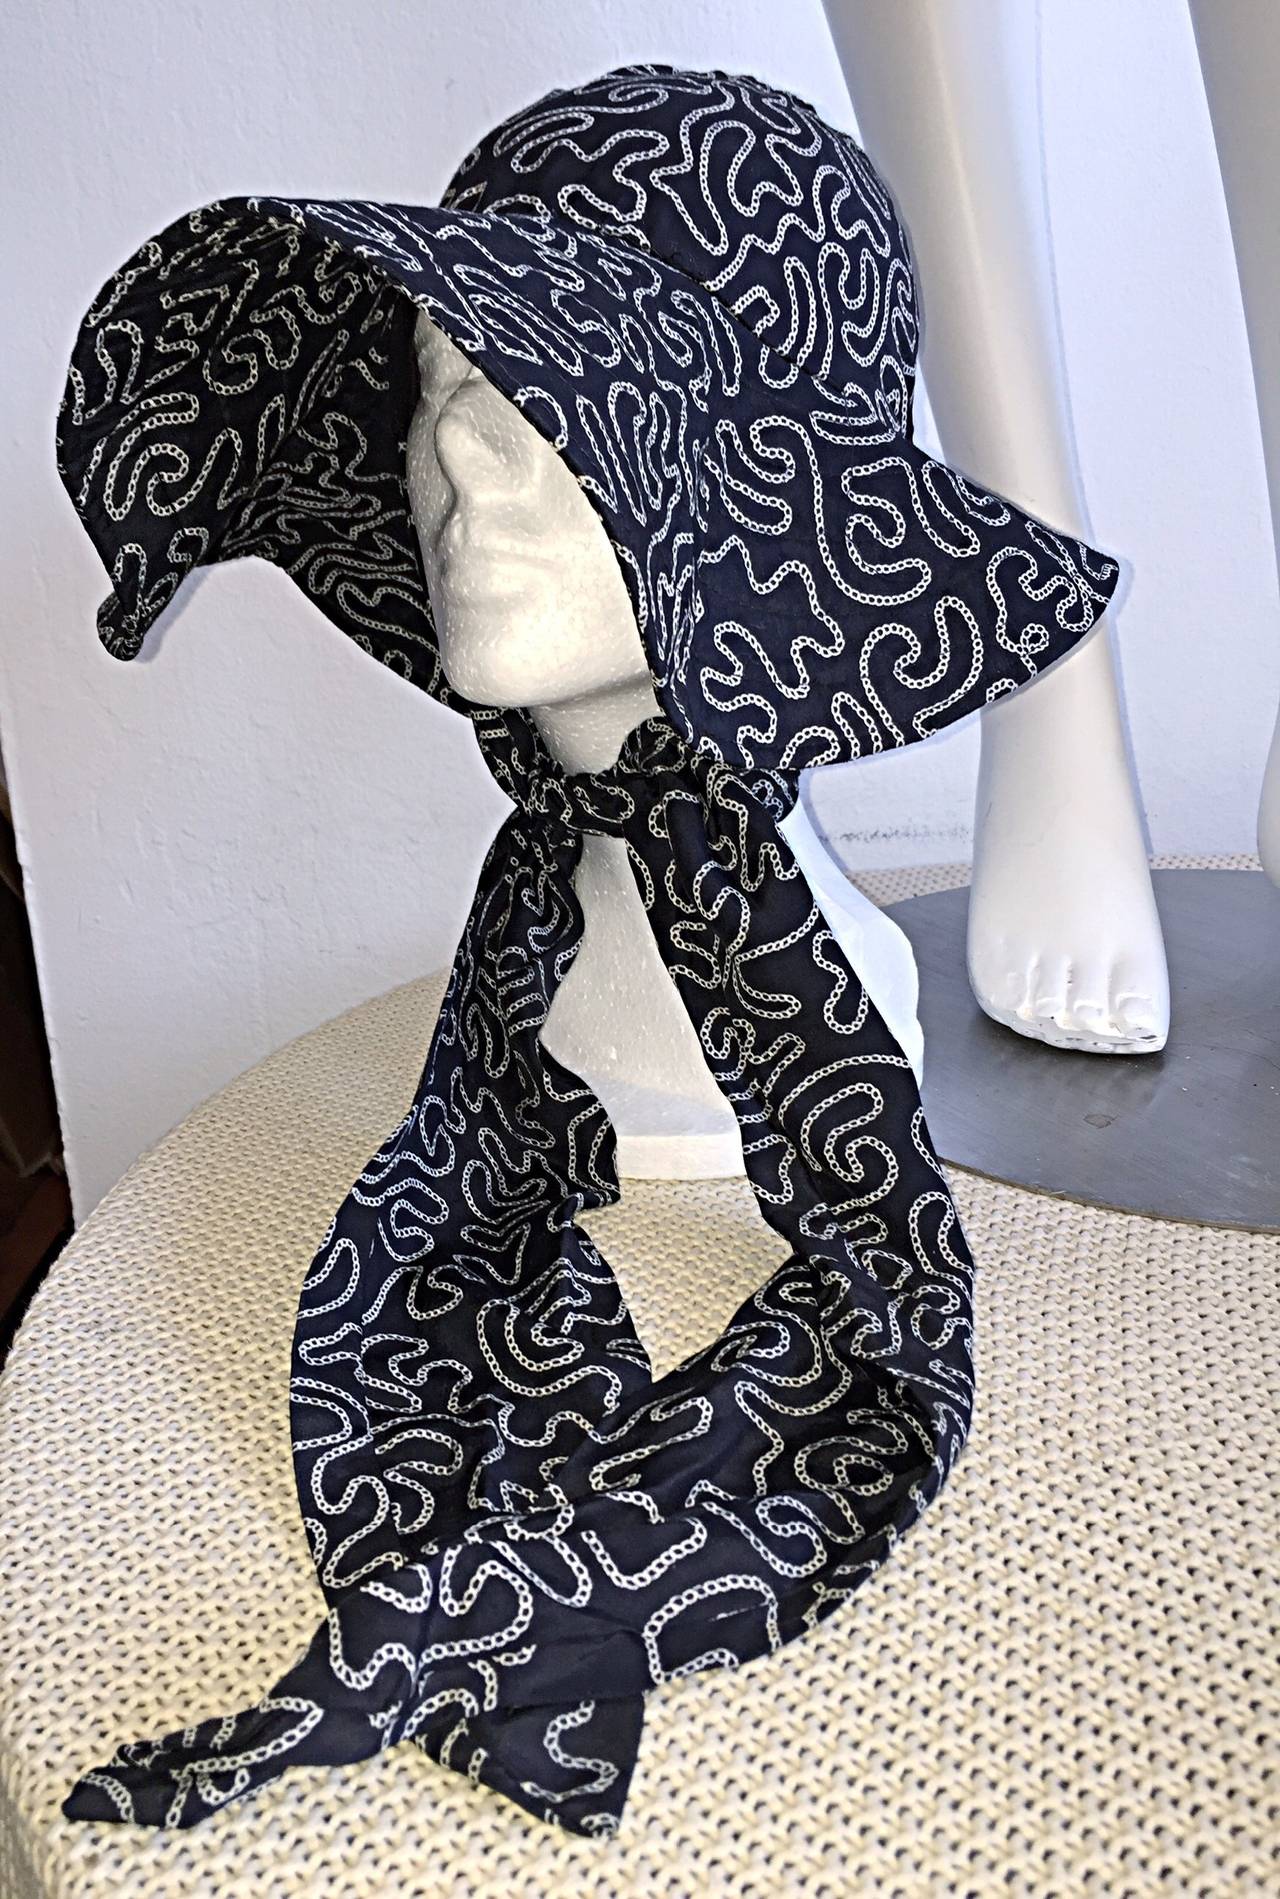 Incredibly rare vintage Norma Kamali for Stetson wide brimmed hat, with attached scarf. Kamali designed a line for Stetson hats in 1983, thus making these extremely hard to find! Amazing white + black 'swirl' print throughout. A true piece of